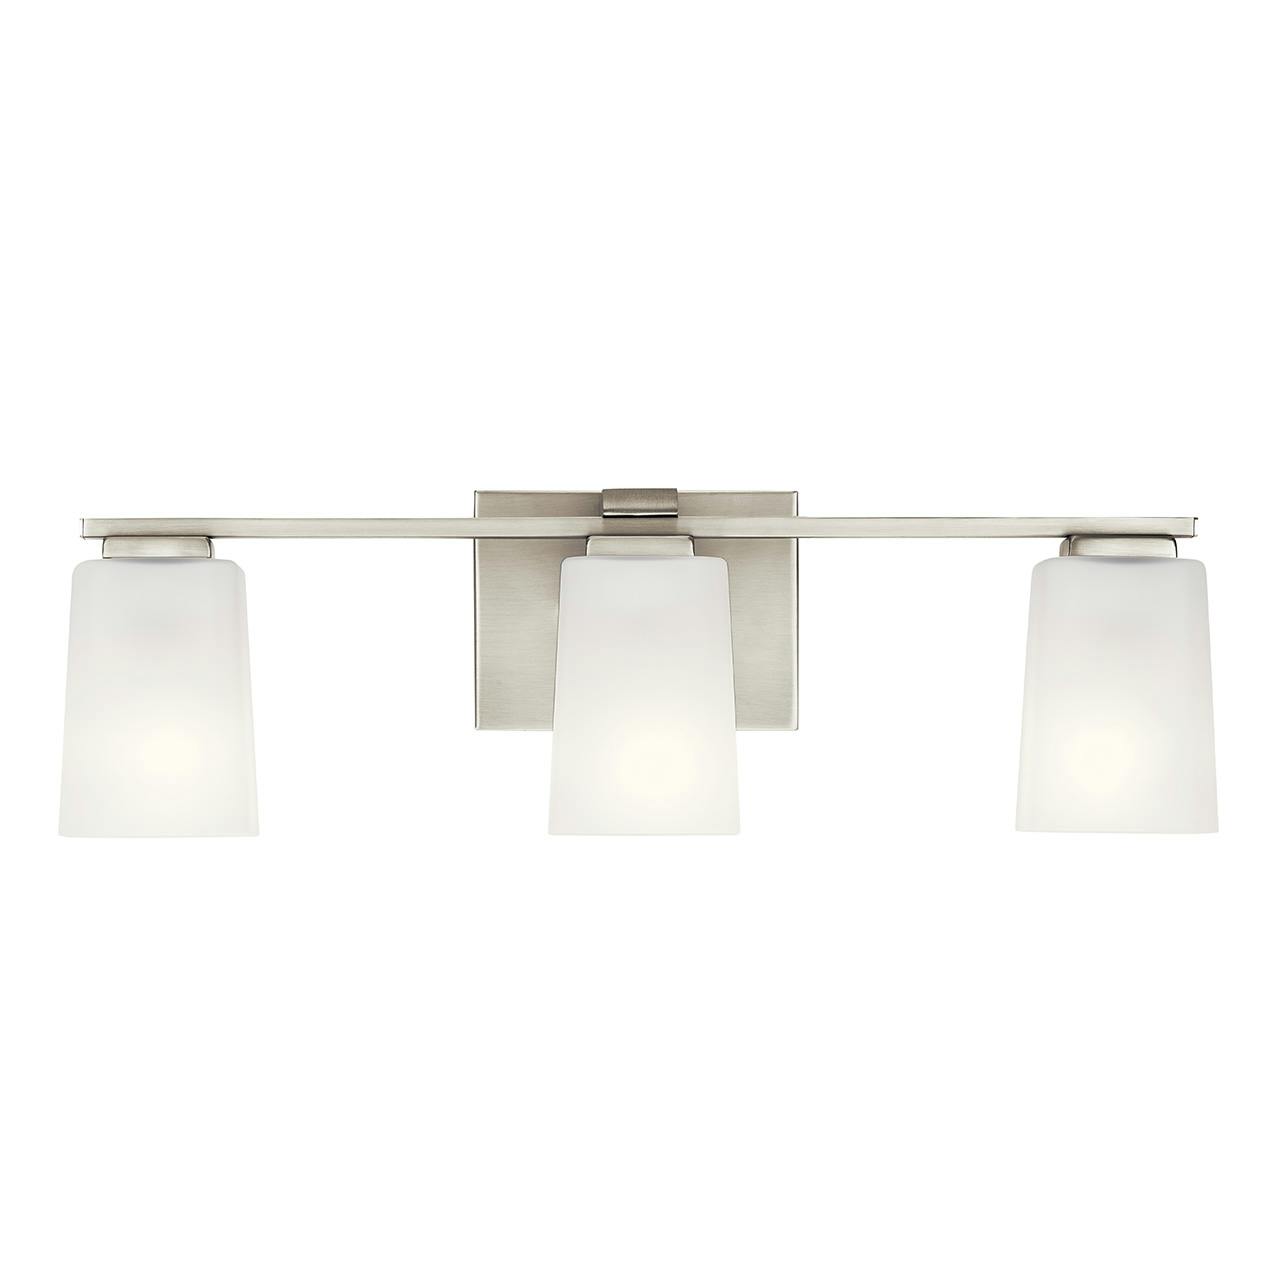 The Roehm 3 Light Vanity Light Brushed Nickel facing down on a white background